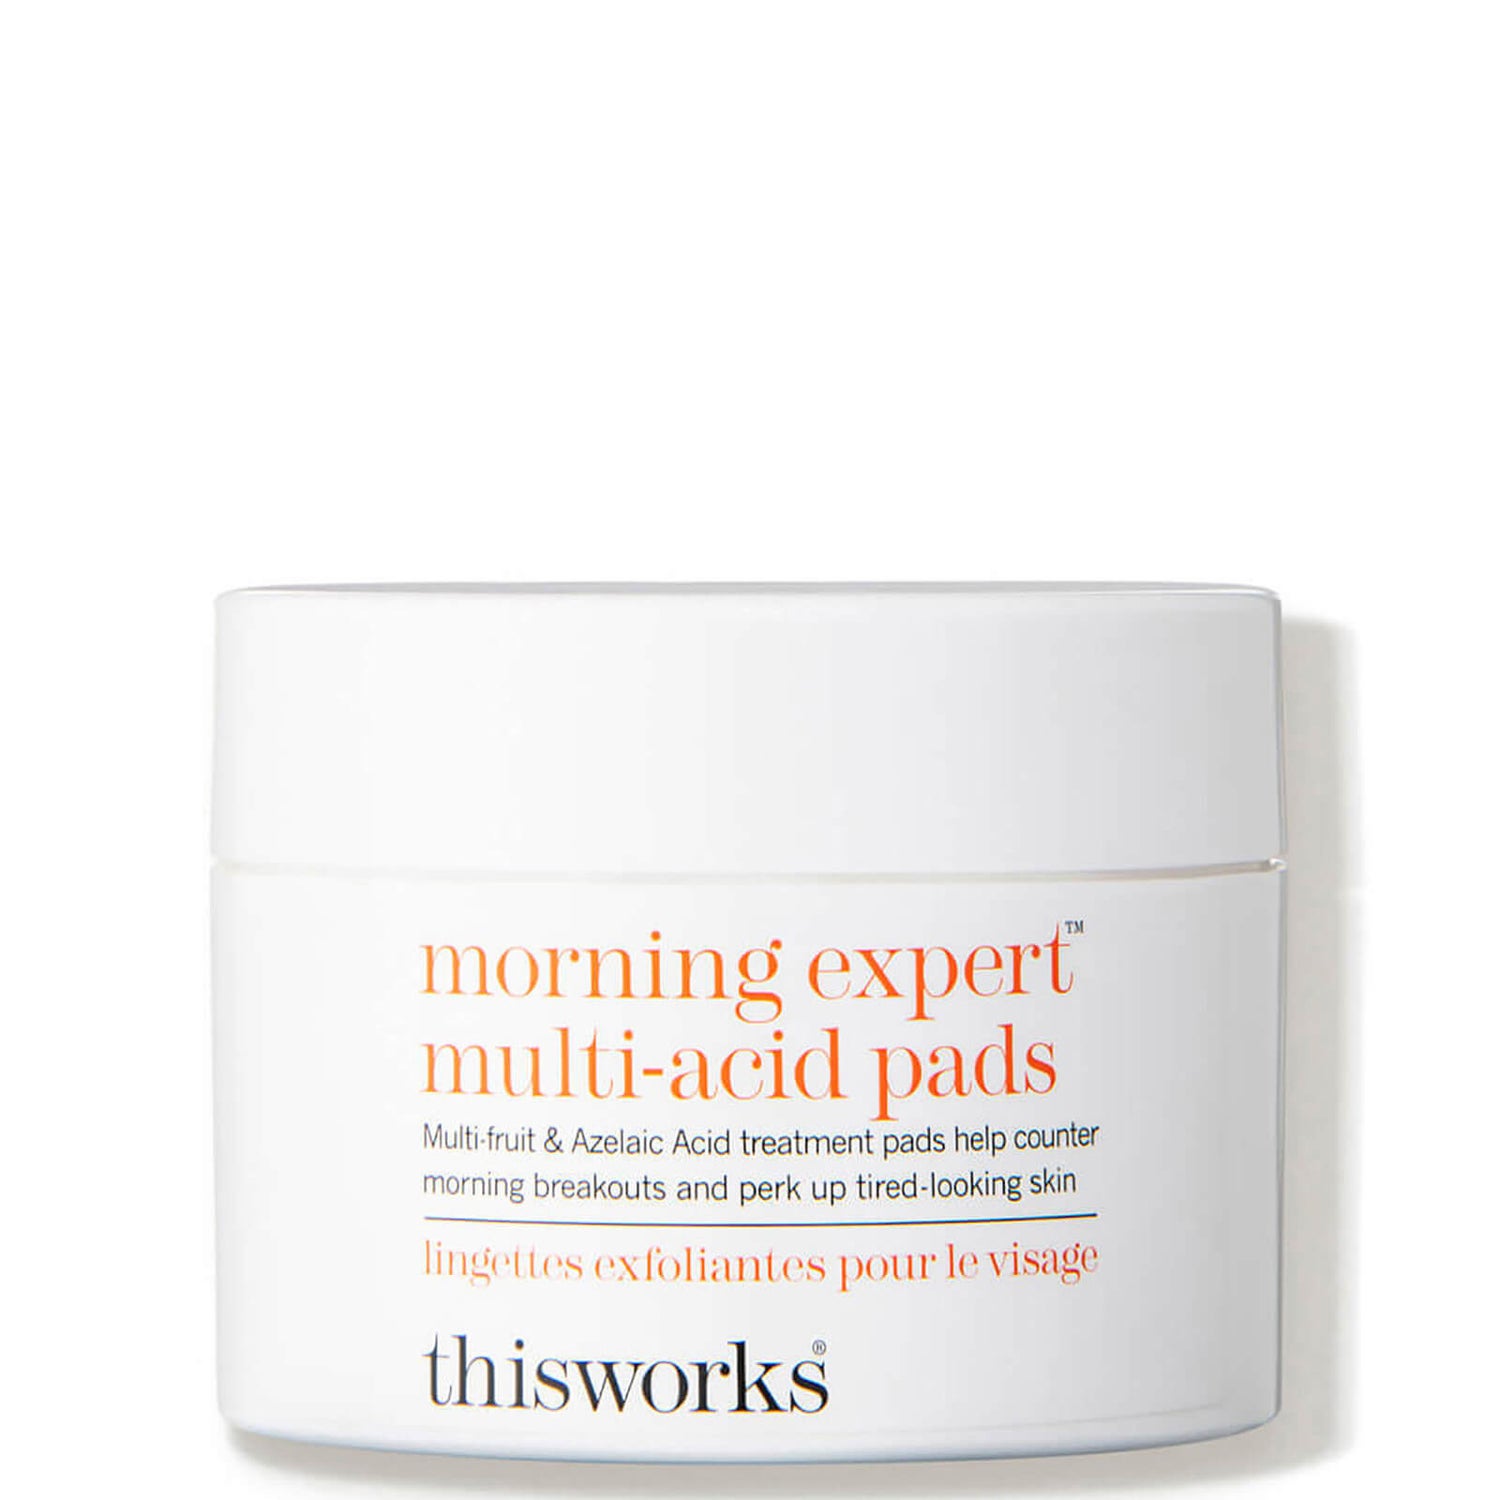 this works morning expert multi-acid pads (60 count)